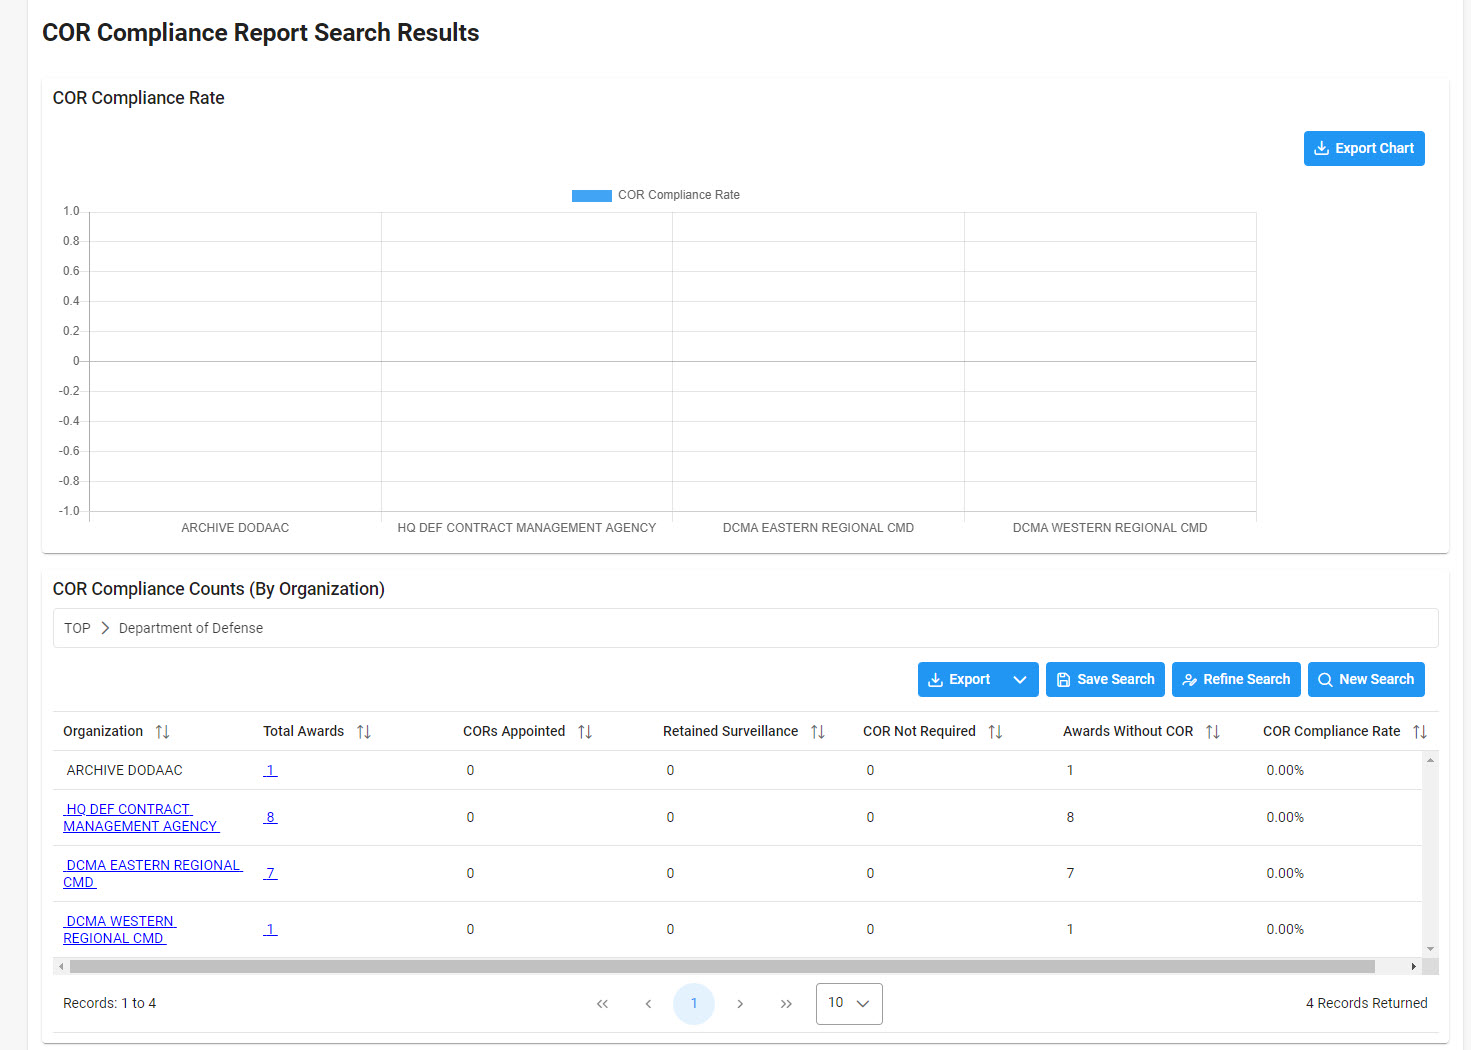 The image provides a preview of the COR Compliance Report Export Results button.